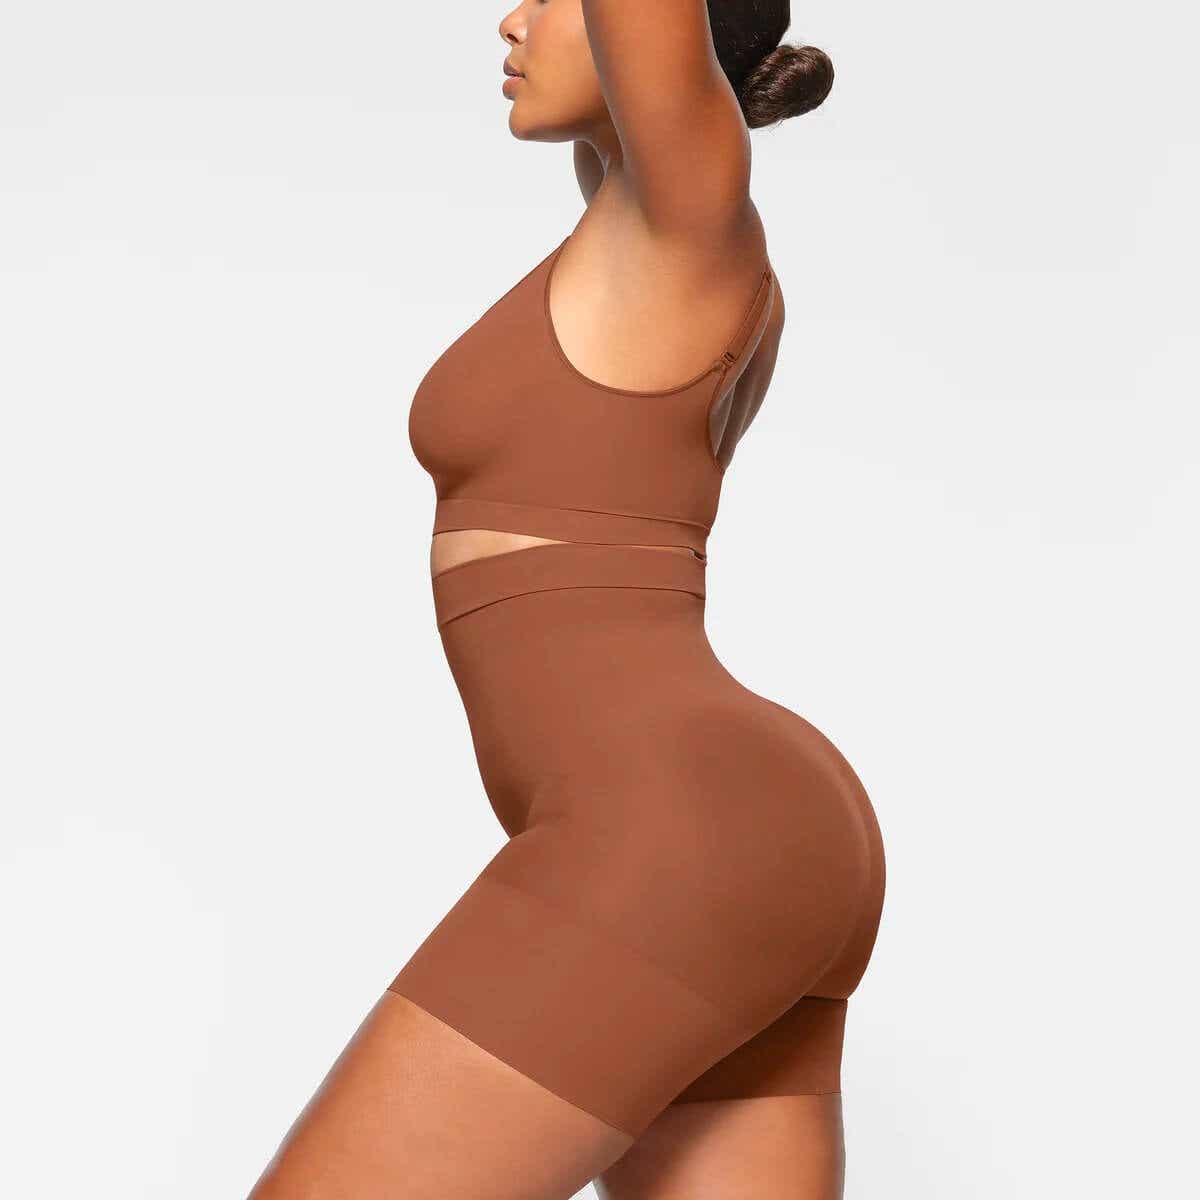 Shapewear comfortable enough to wear around the clock drops